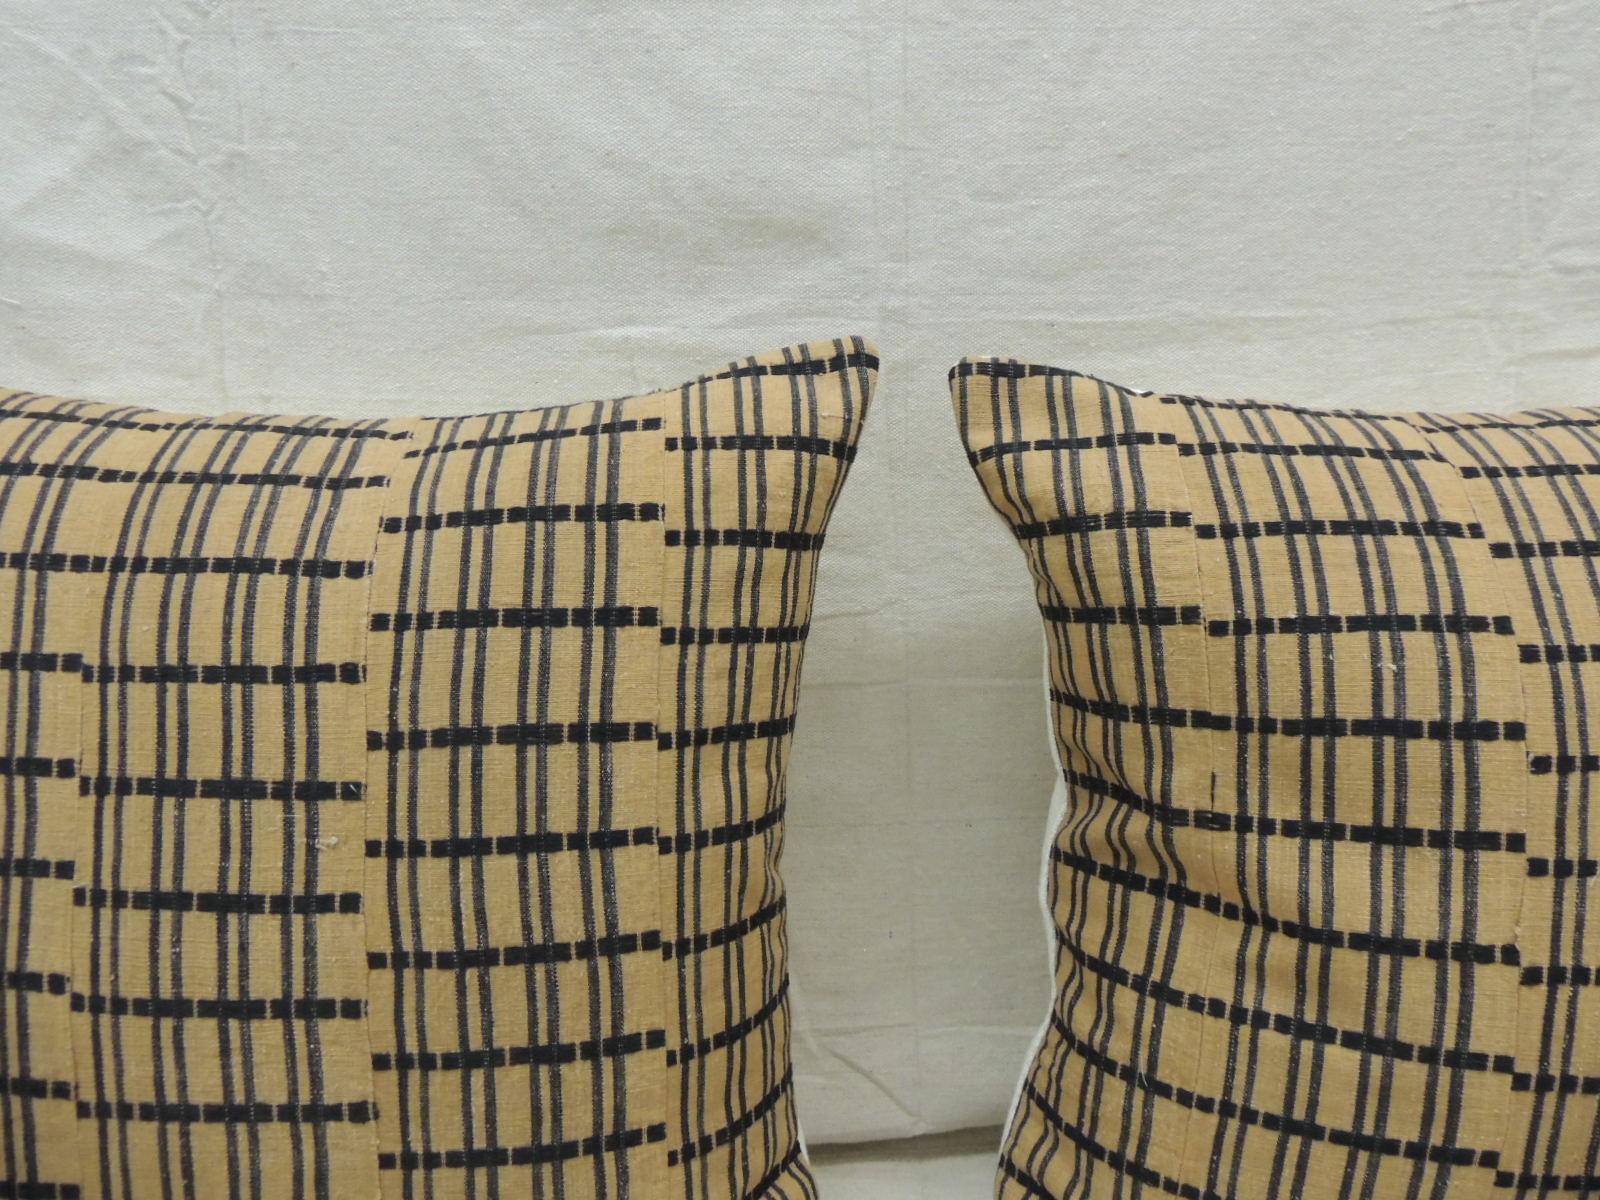 Vintage pair of yellow and dark blue African Stripweaves square decorative pillows
with heavy woven cotton/linen backings.
Decorative pillow handcrafted and designed in the USA. 
Closure by stitch (no zipper closure) with custom made pillow